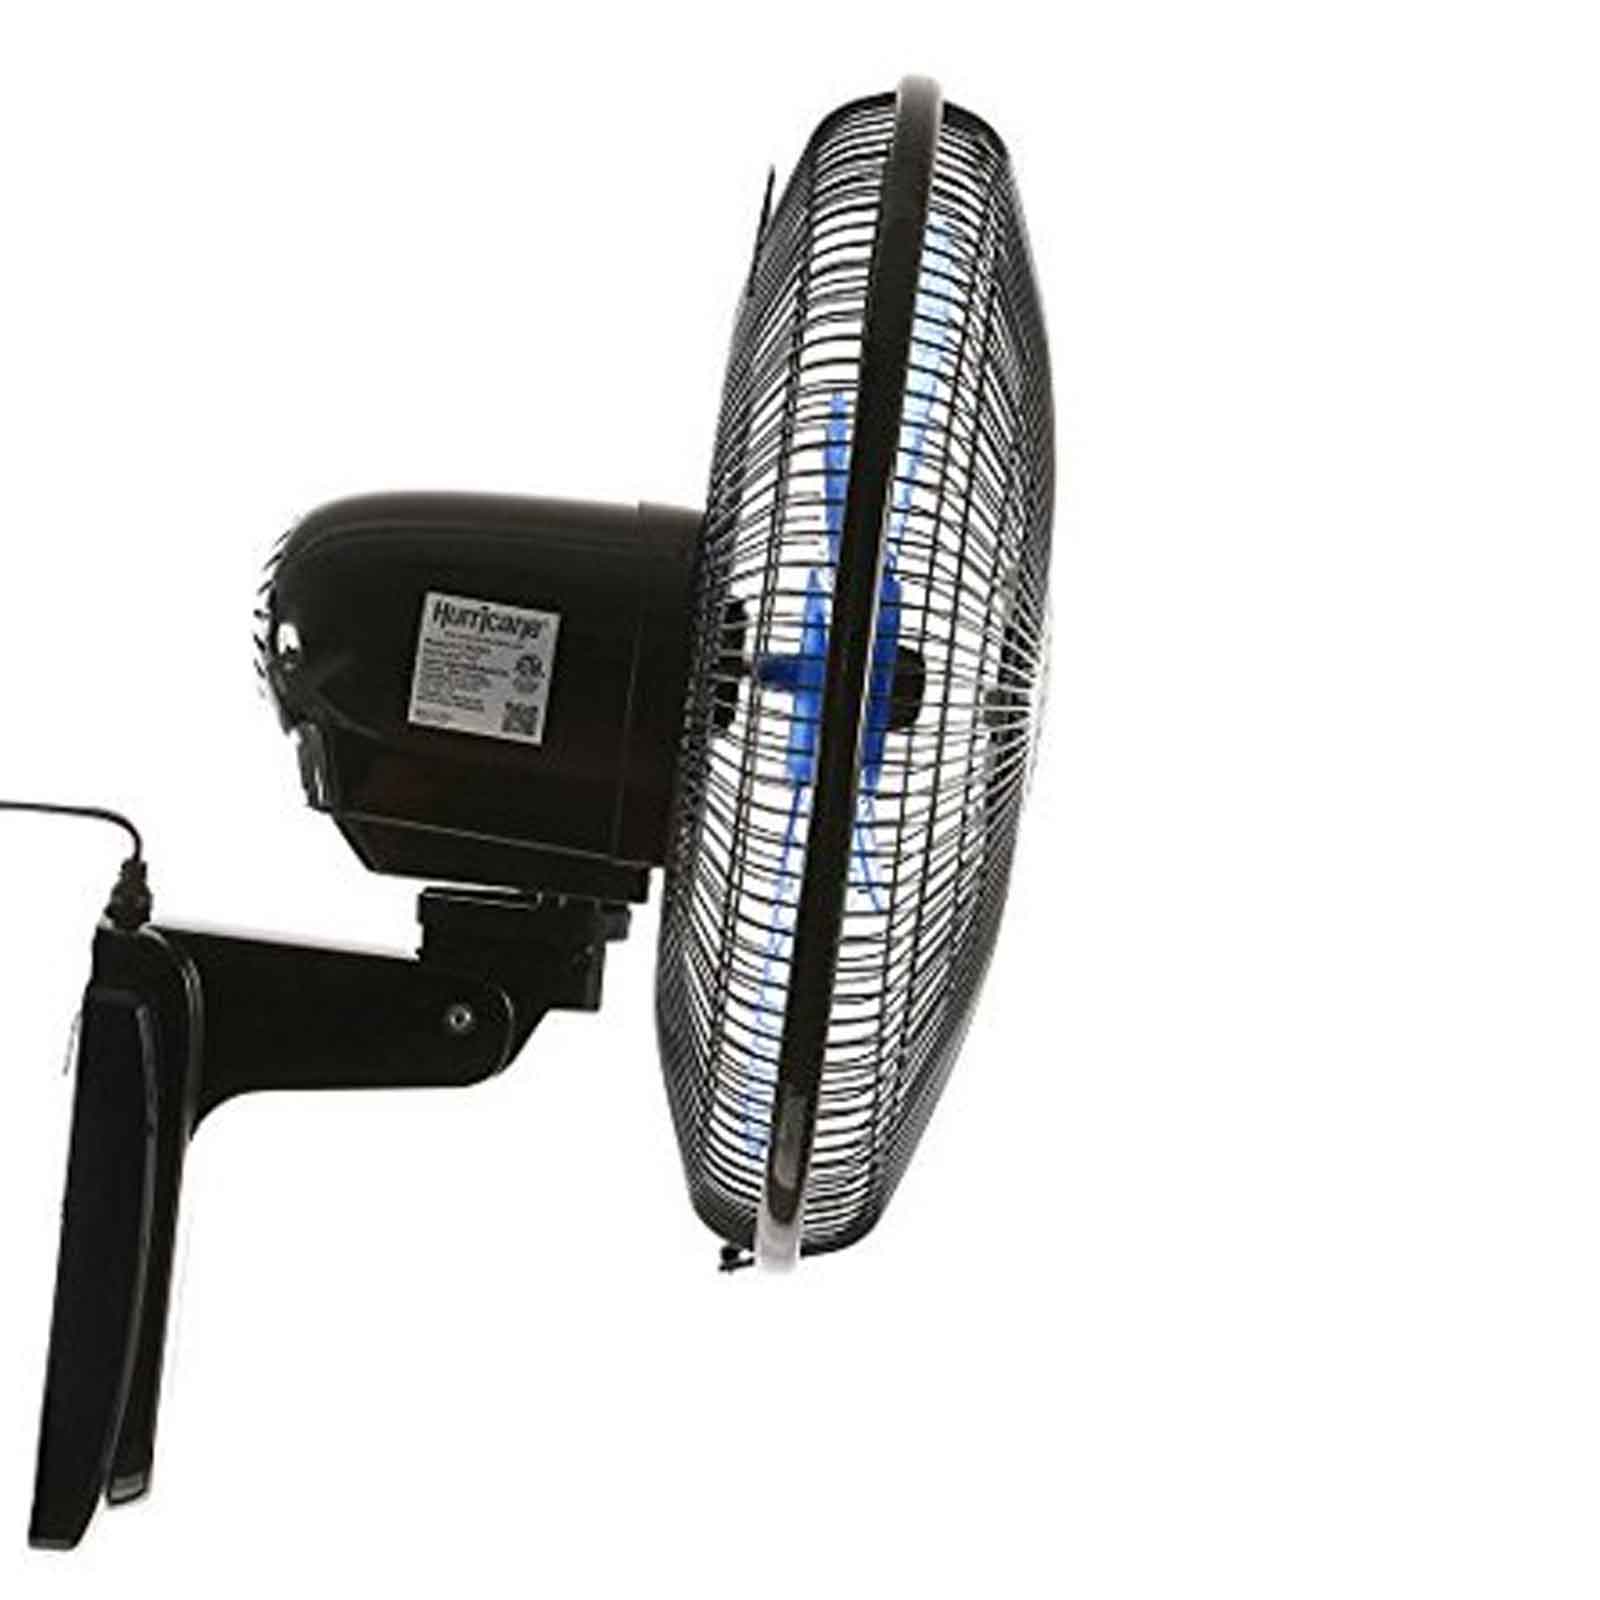 Outdoor Oscillating Fan Wall Mount Garage Cooling Fans With Remote Silent Black | eBay